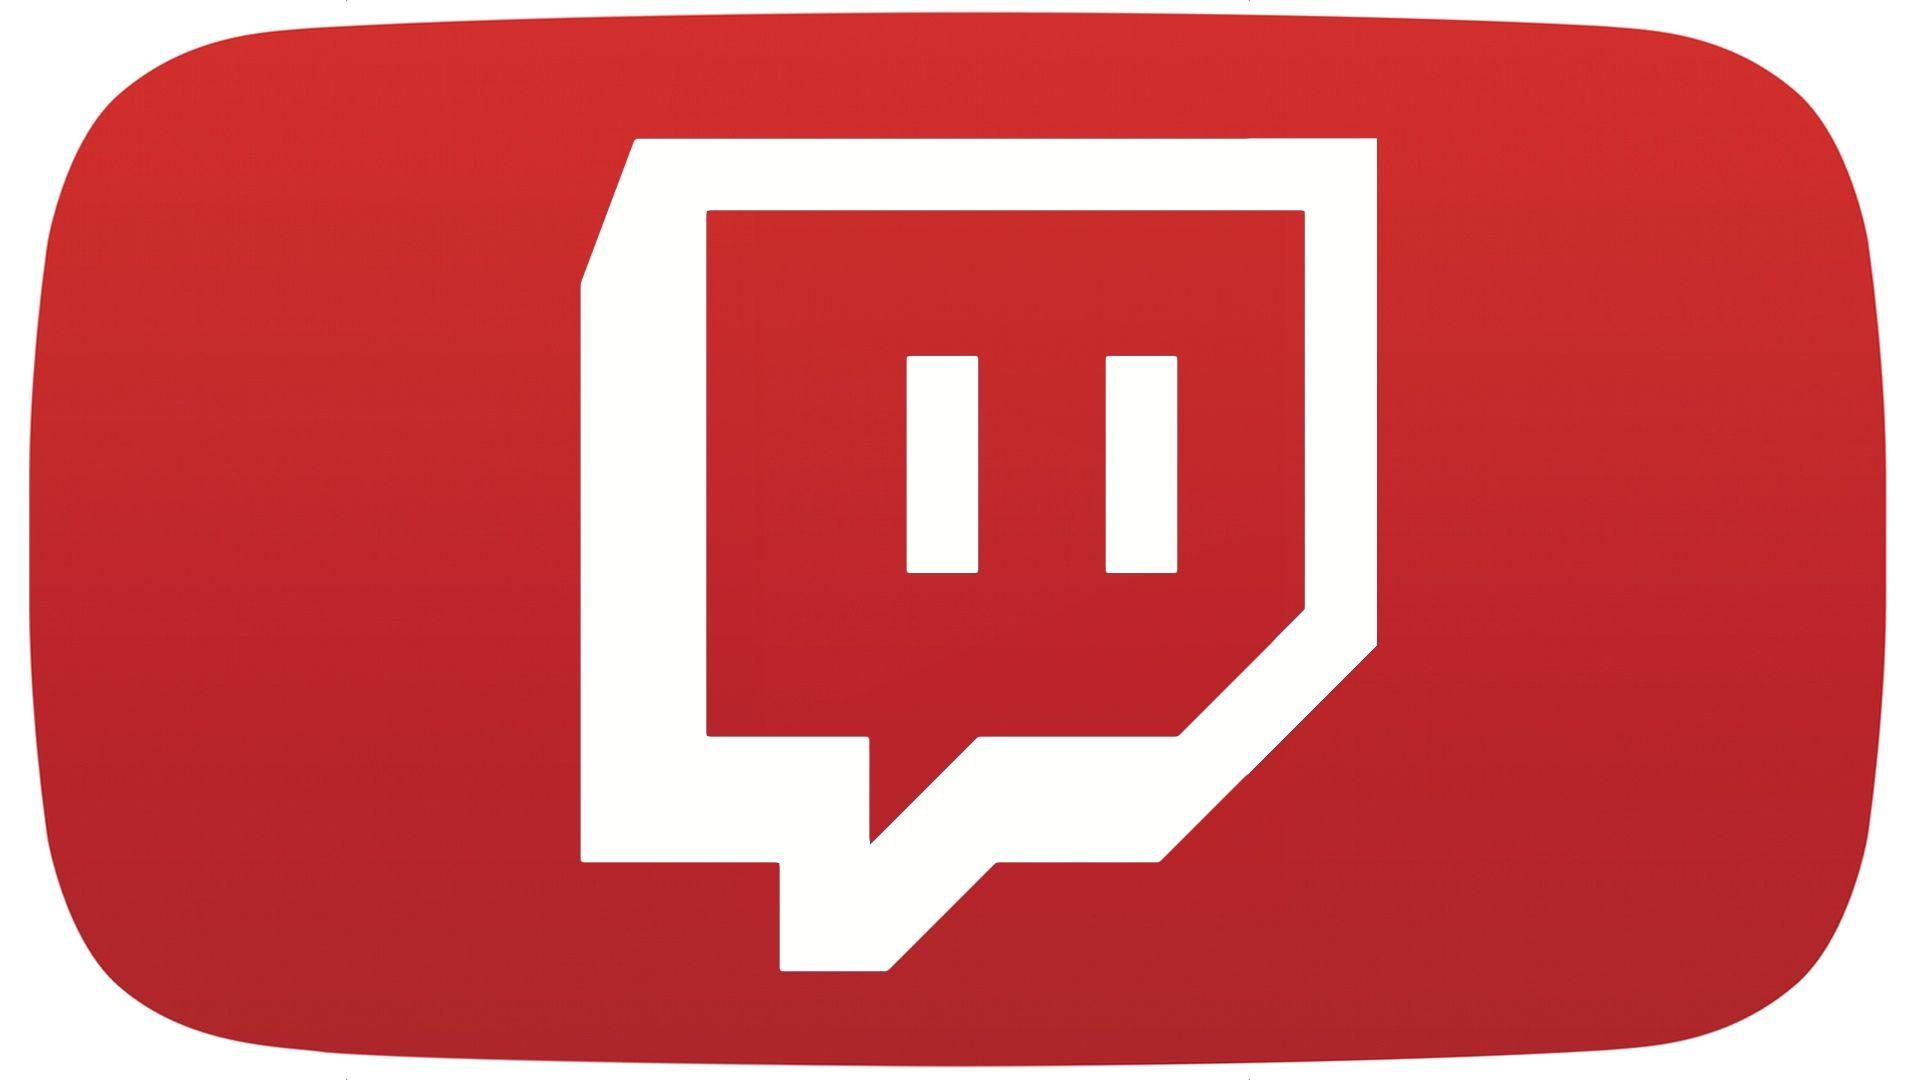 New Twitch Logo - YouTube is paying top creators to promote its new Twitch-style ...